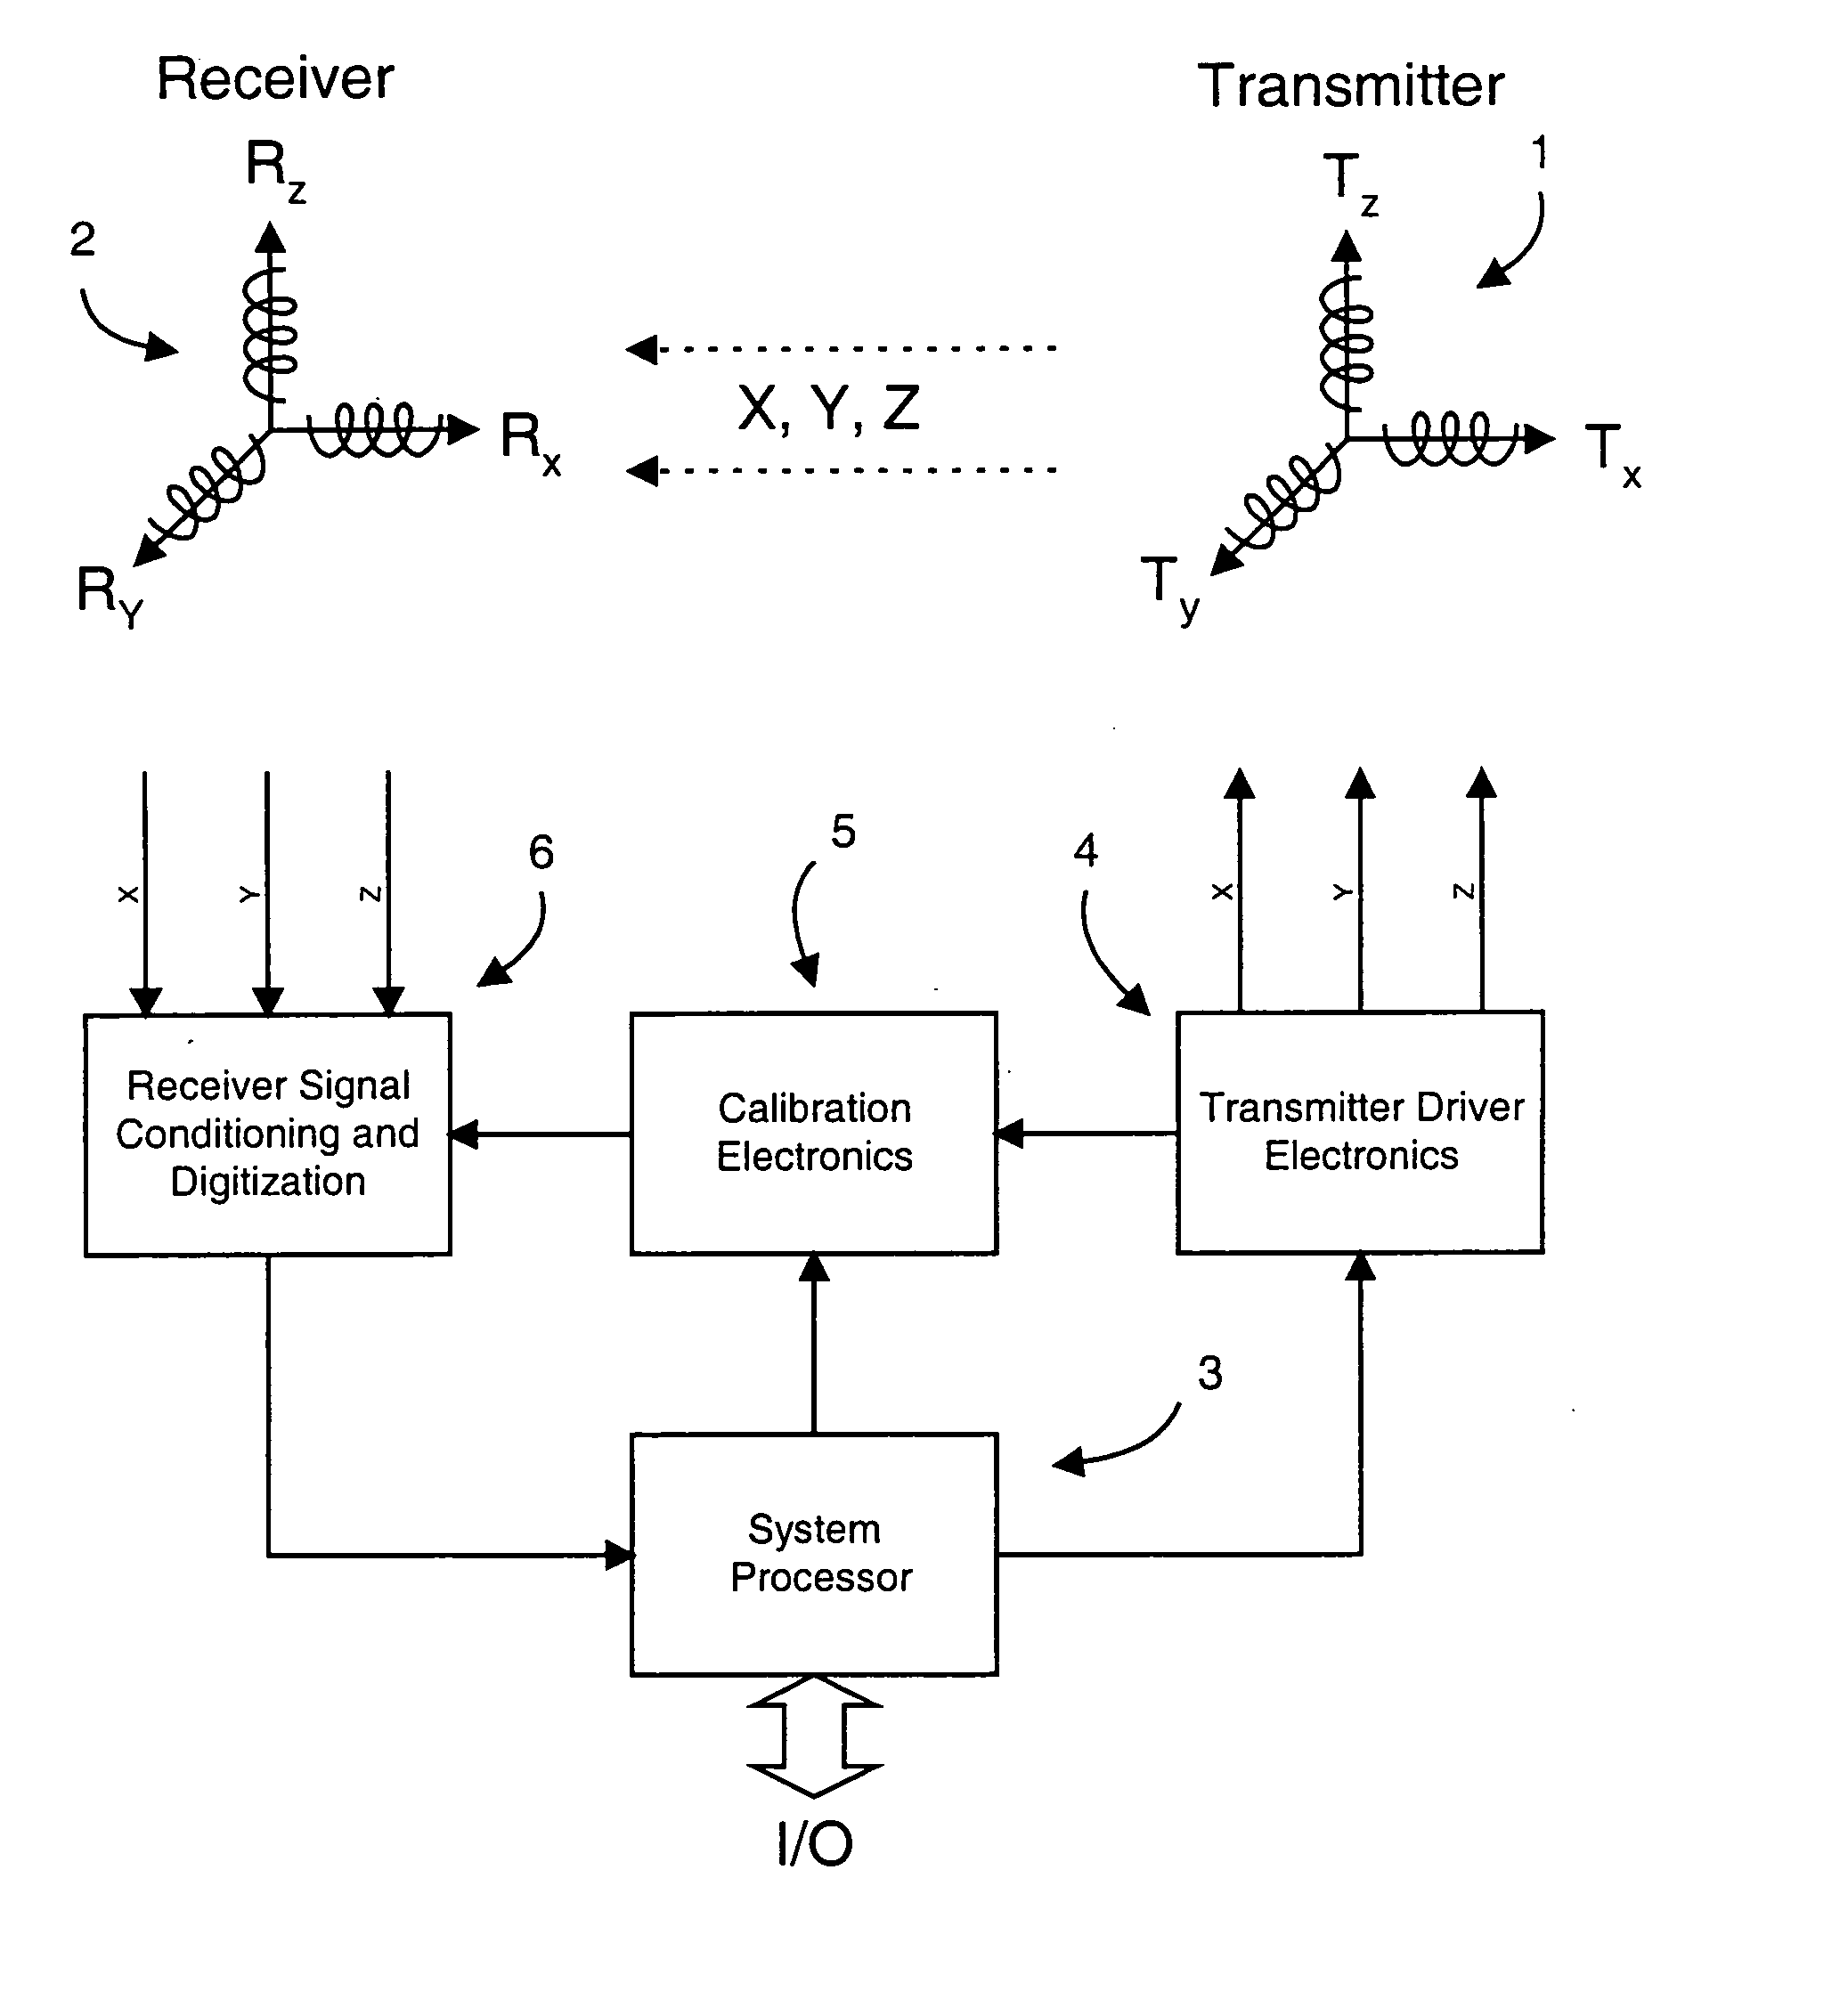 AC magnetic tracking system with non-coherency between sources and sensors